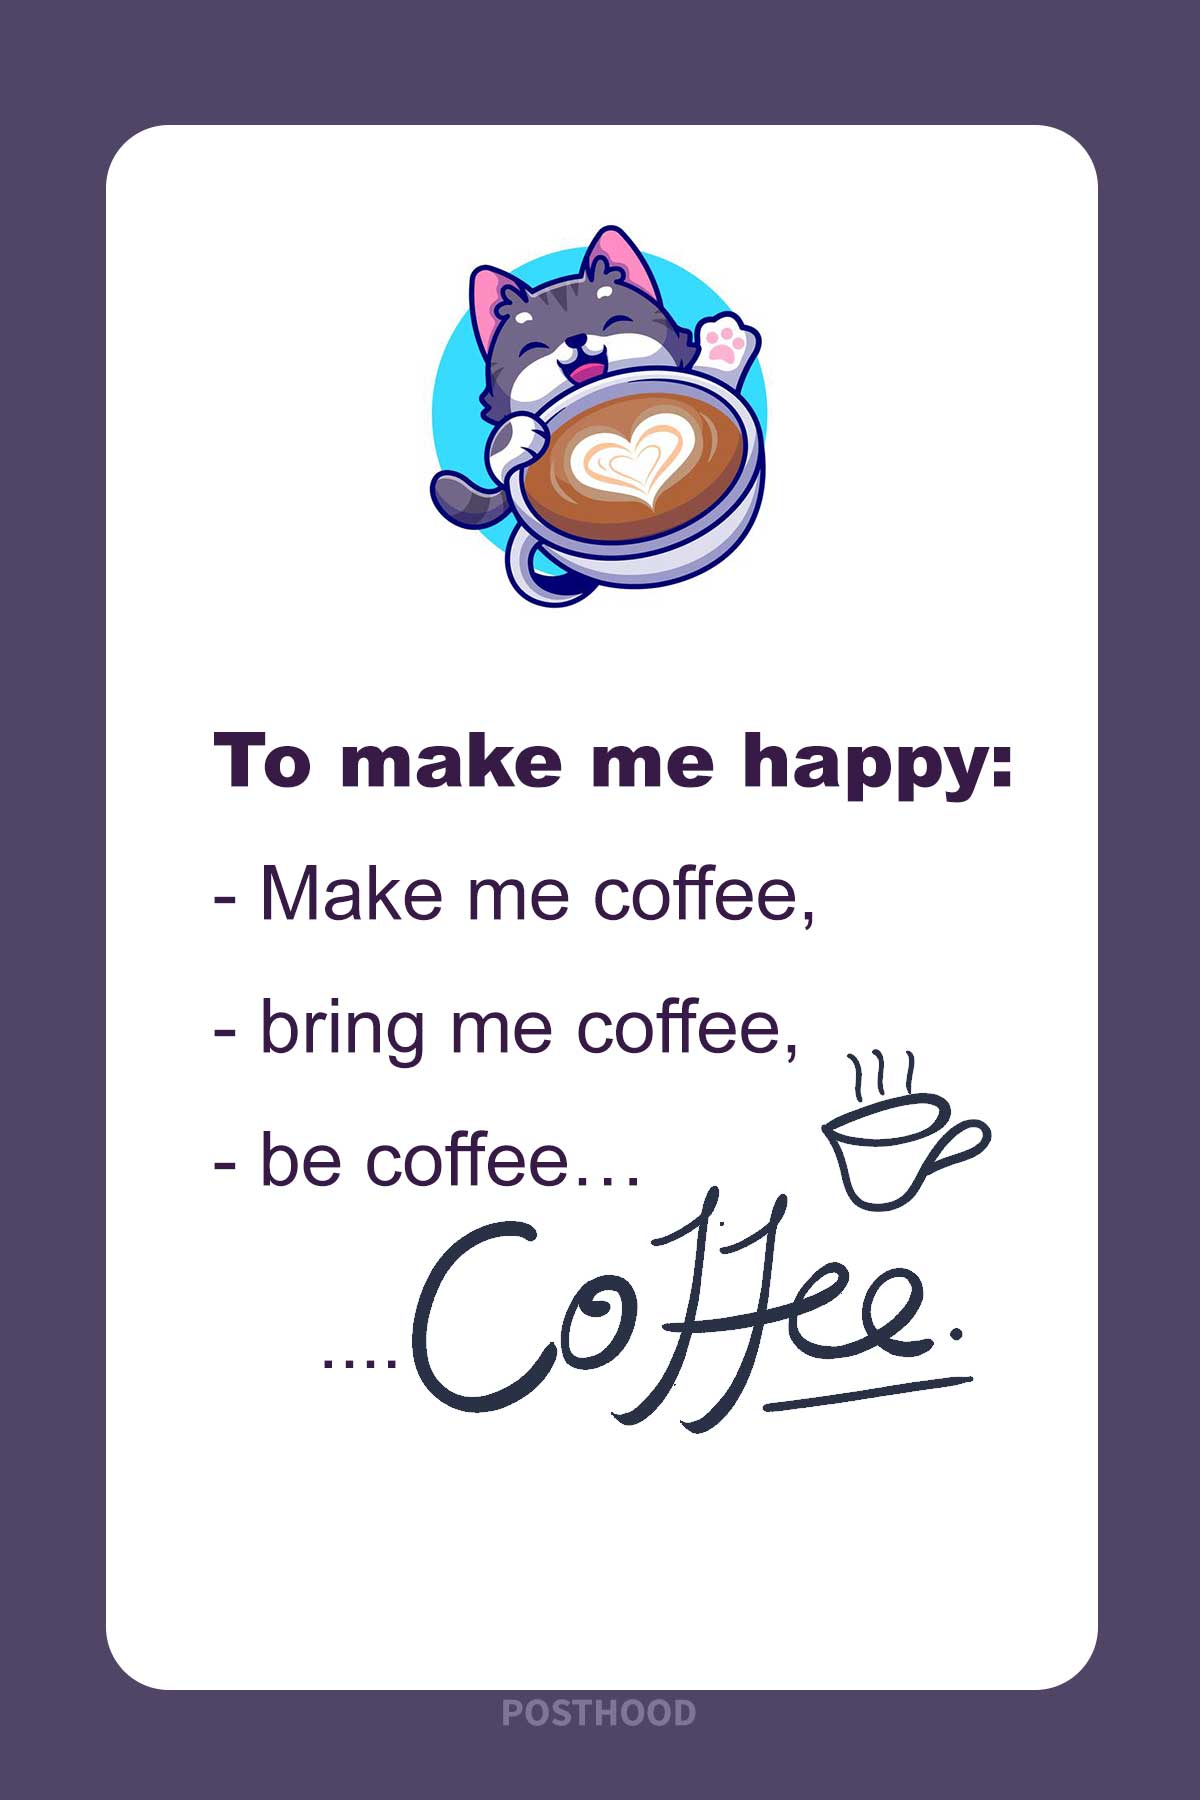 80 Cute coffee quotes that will show you how to make me happy for the rest of my day. Best coffee quotes for her.